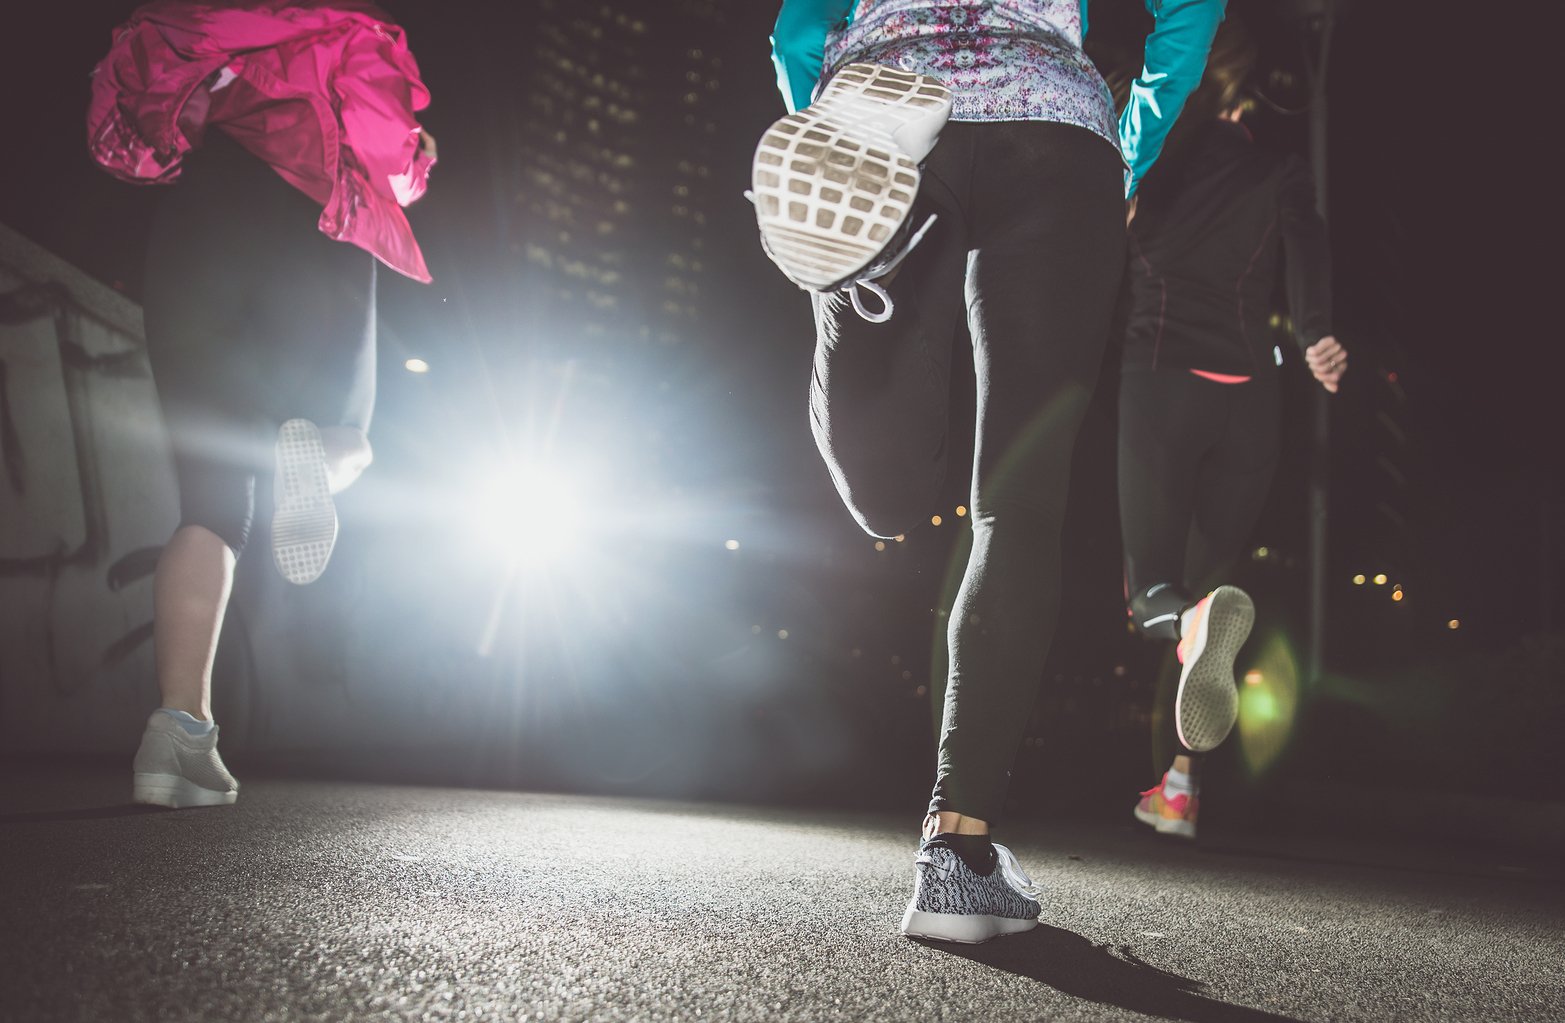 Recent Scientific Research Suggests That There May Be an Optimal Time of Day for Exercising